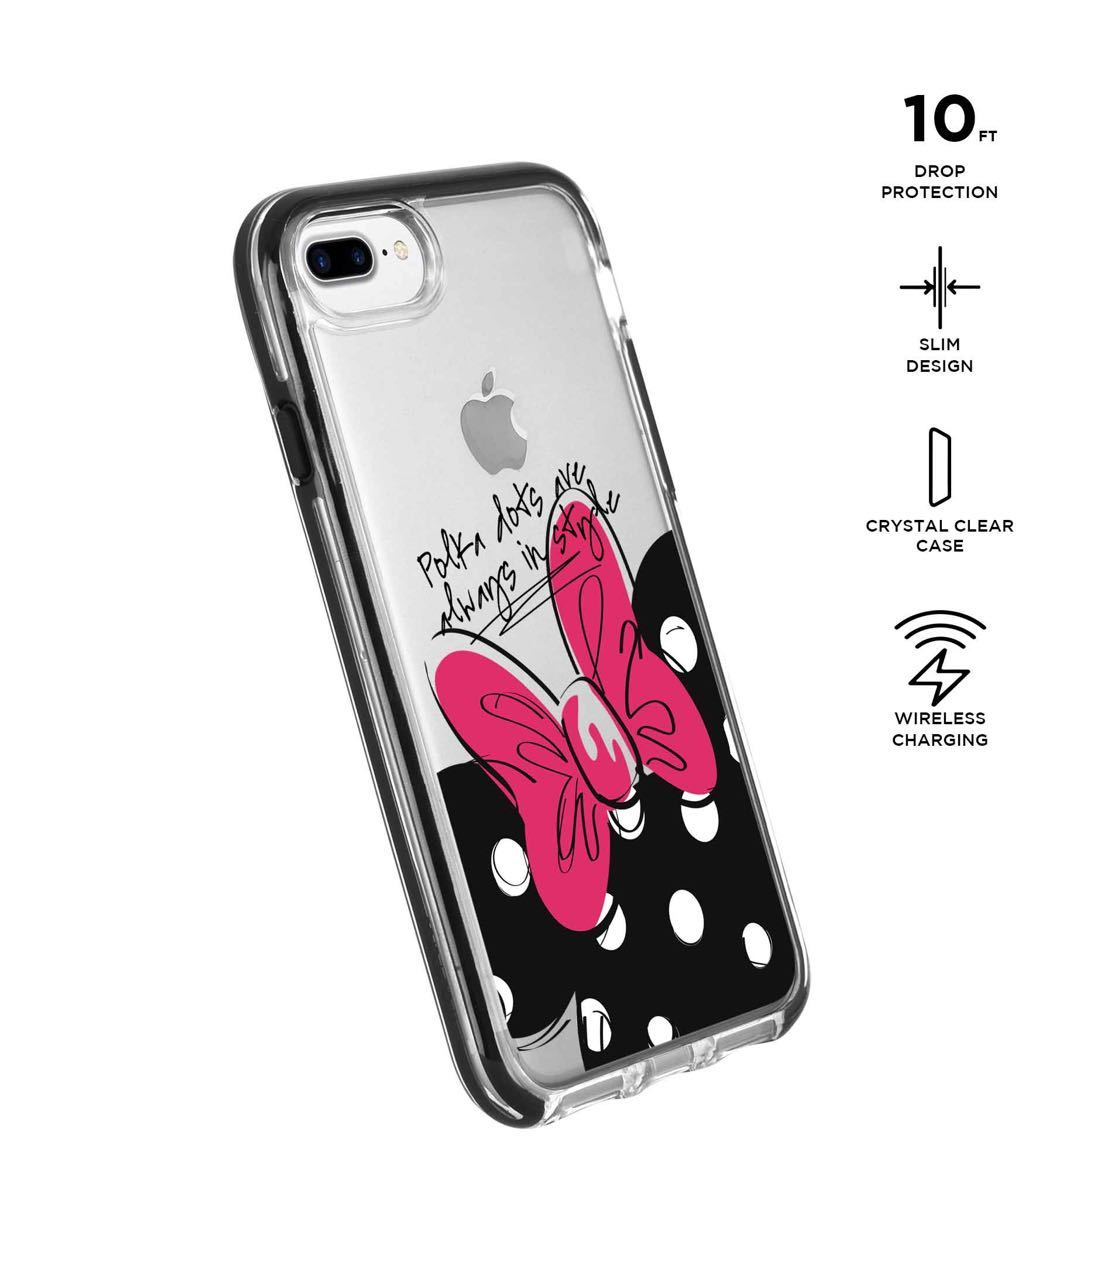 Polka Minnie - Extreme Phone Case for iPhone 7 Plus